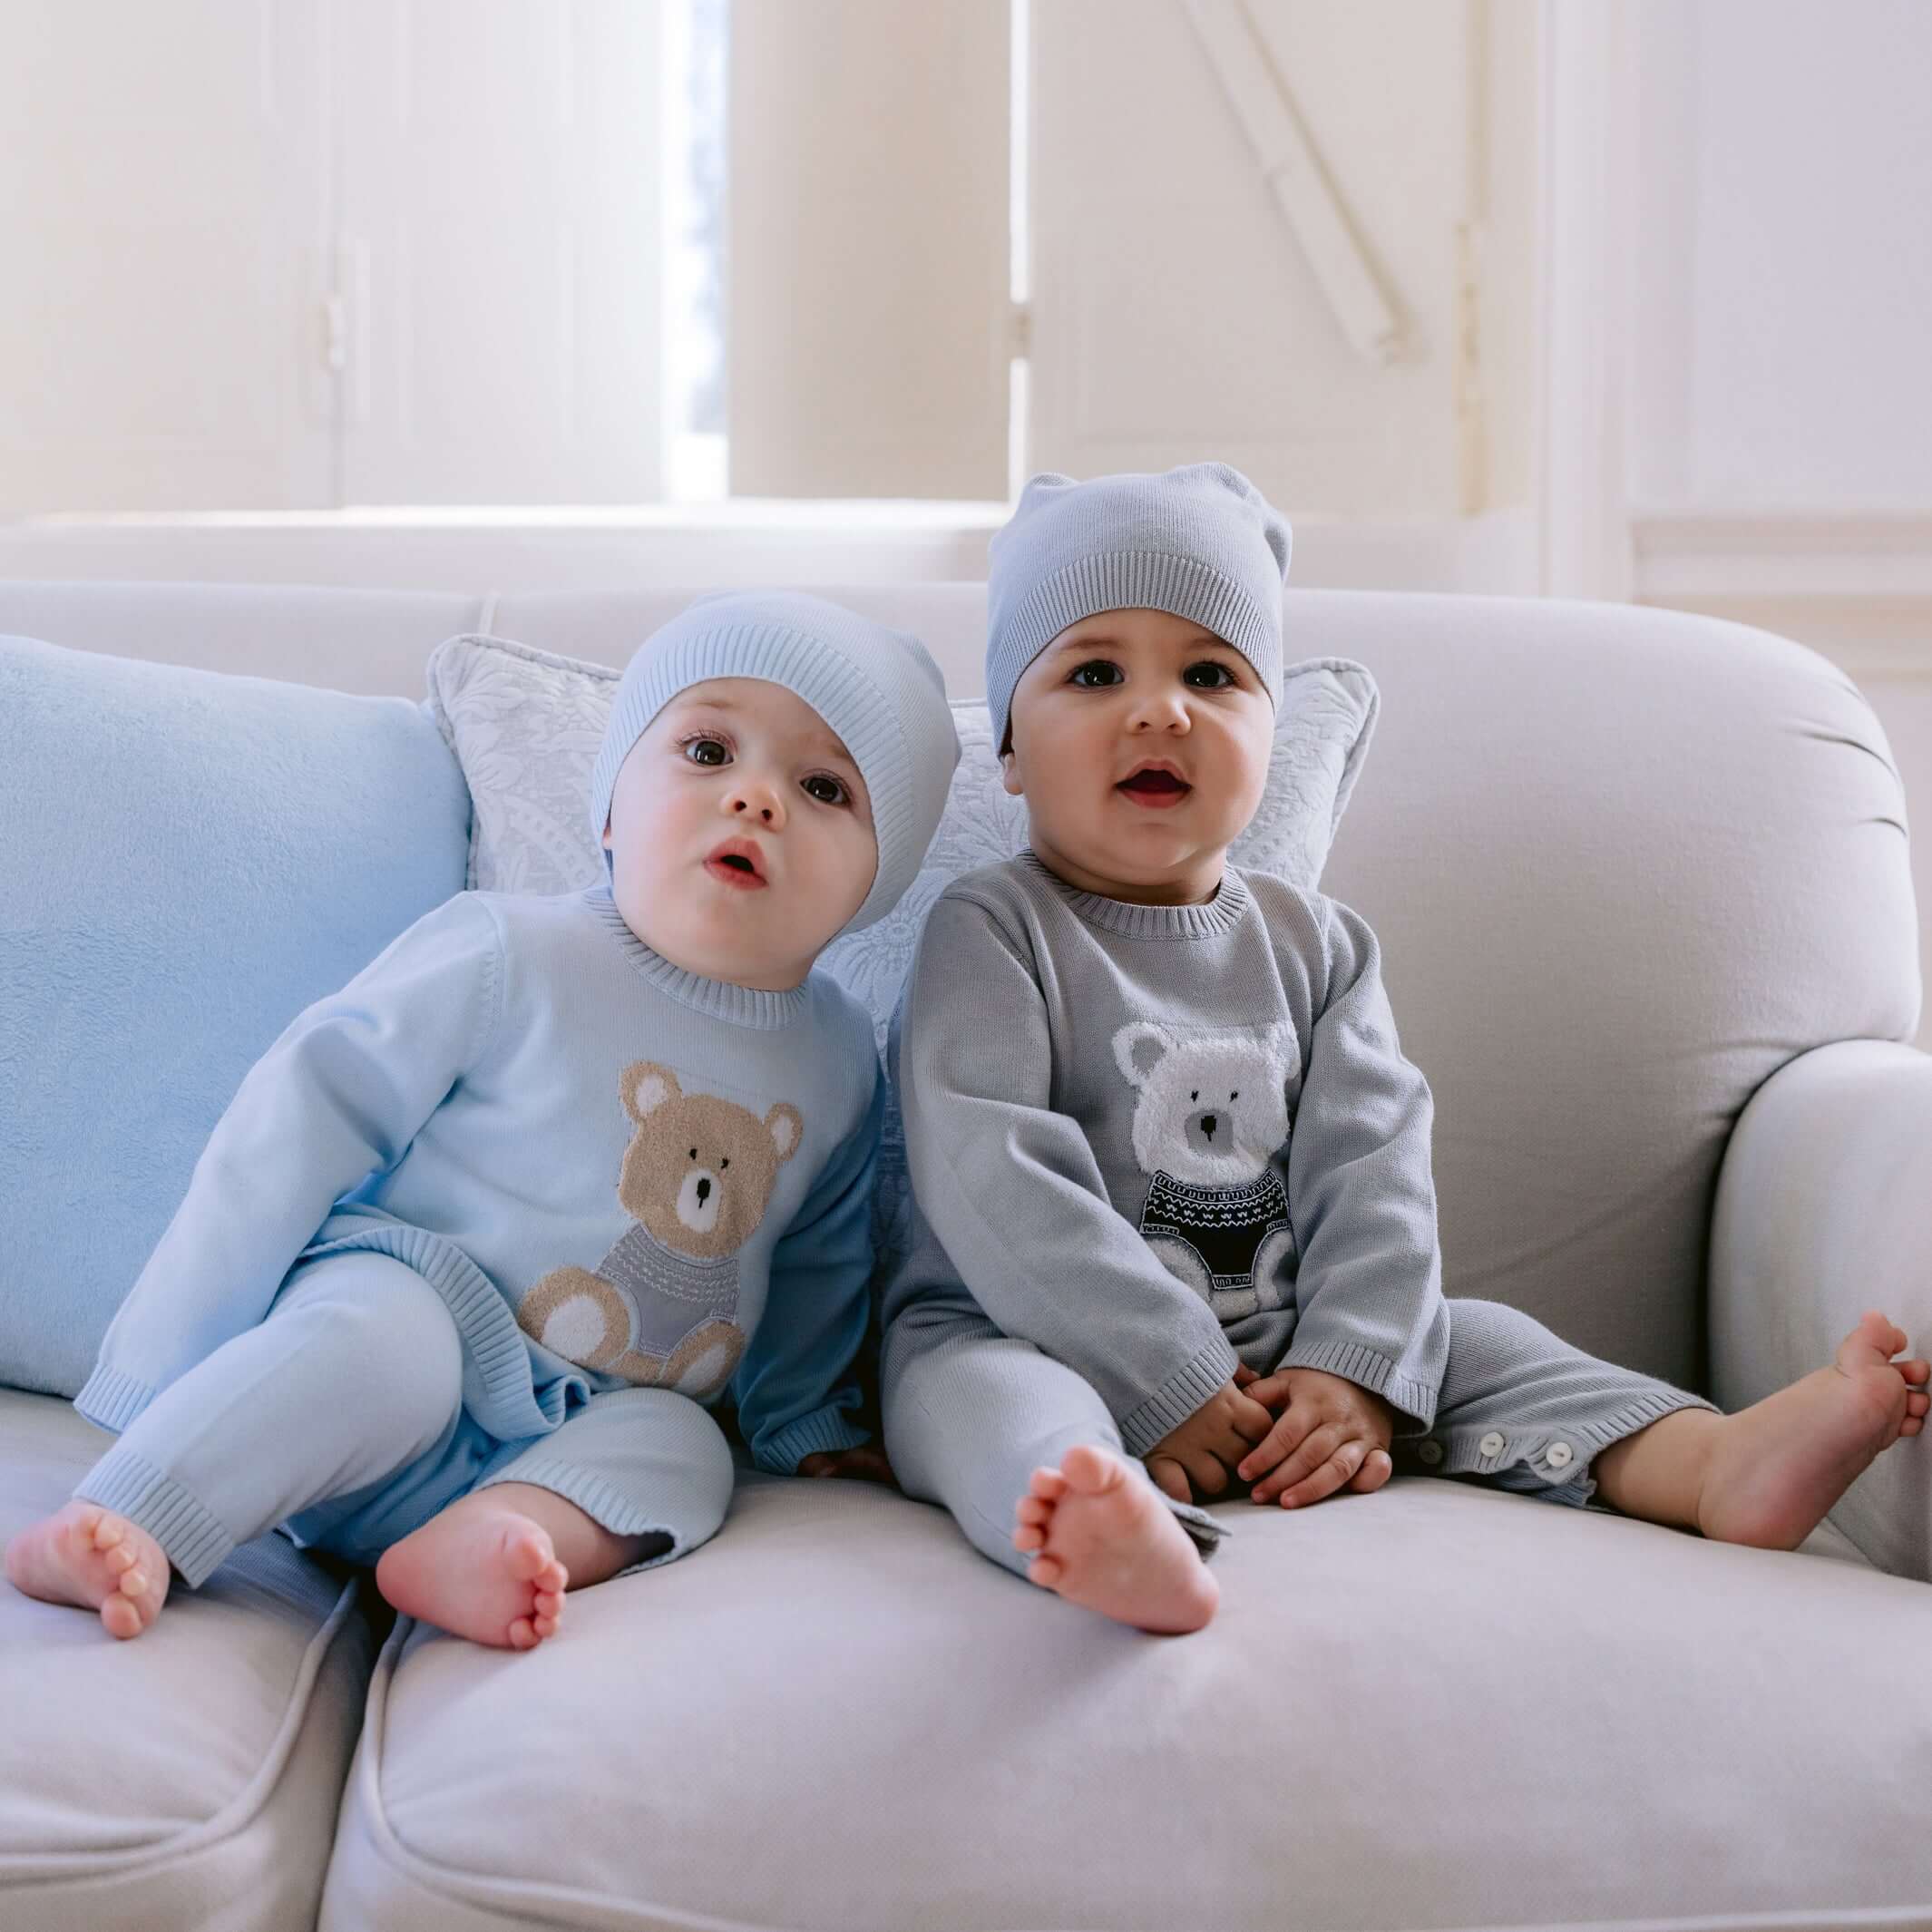 Emile Et Rose Baby Boys Enzo Blue Knitted Set with Hat